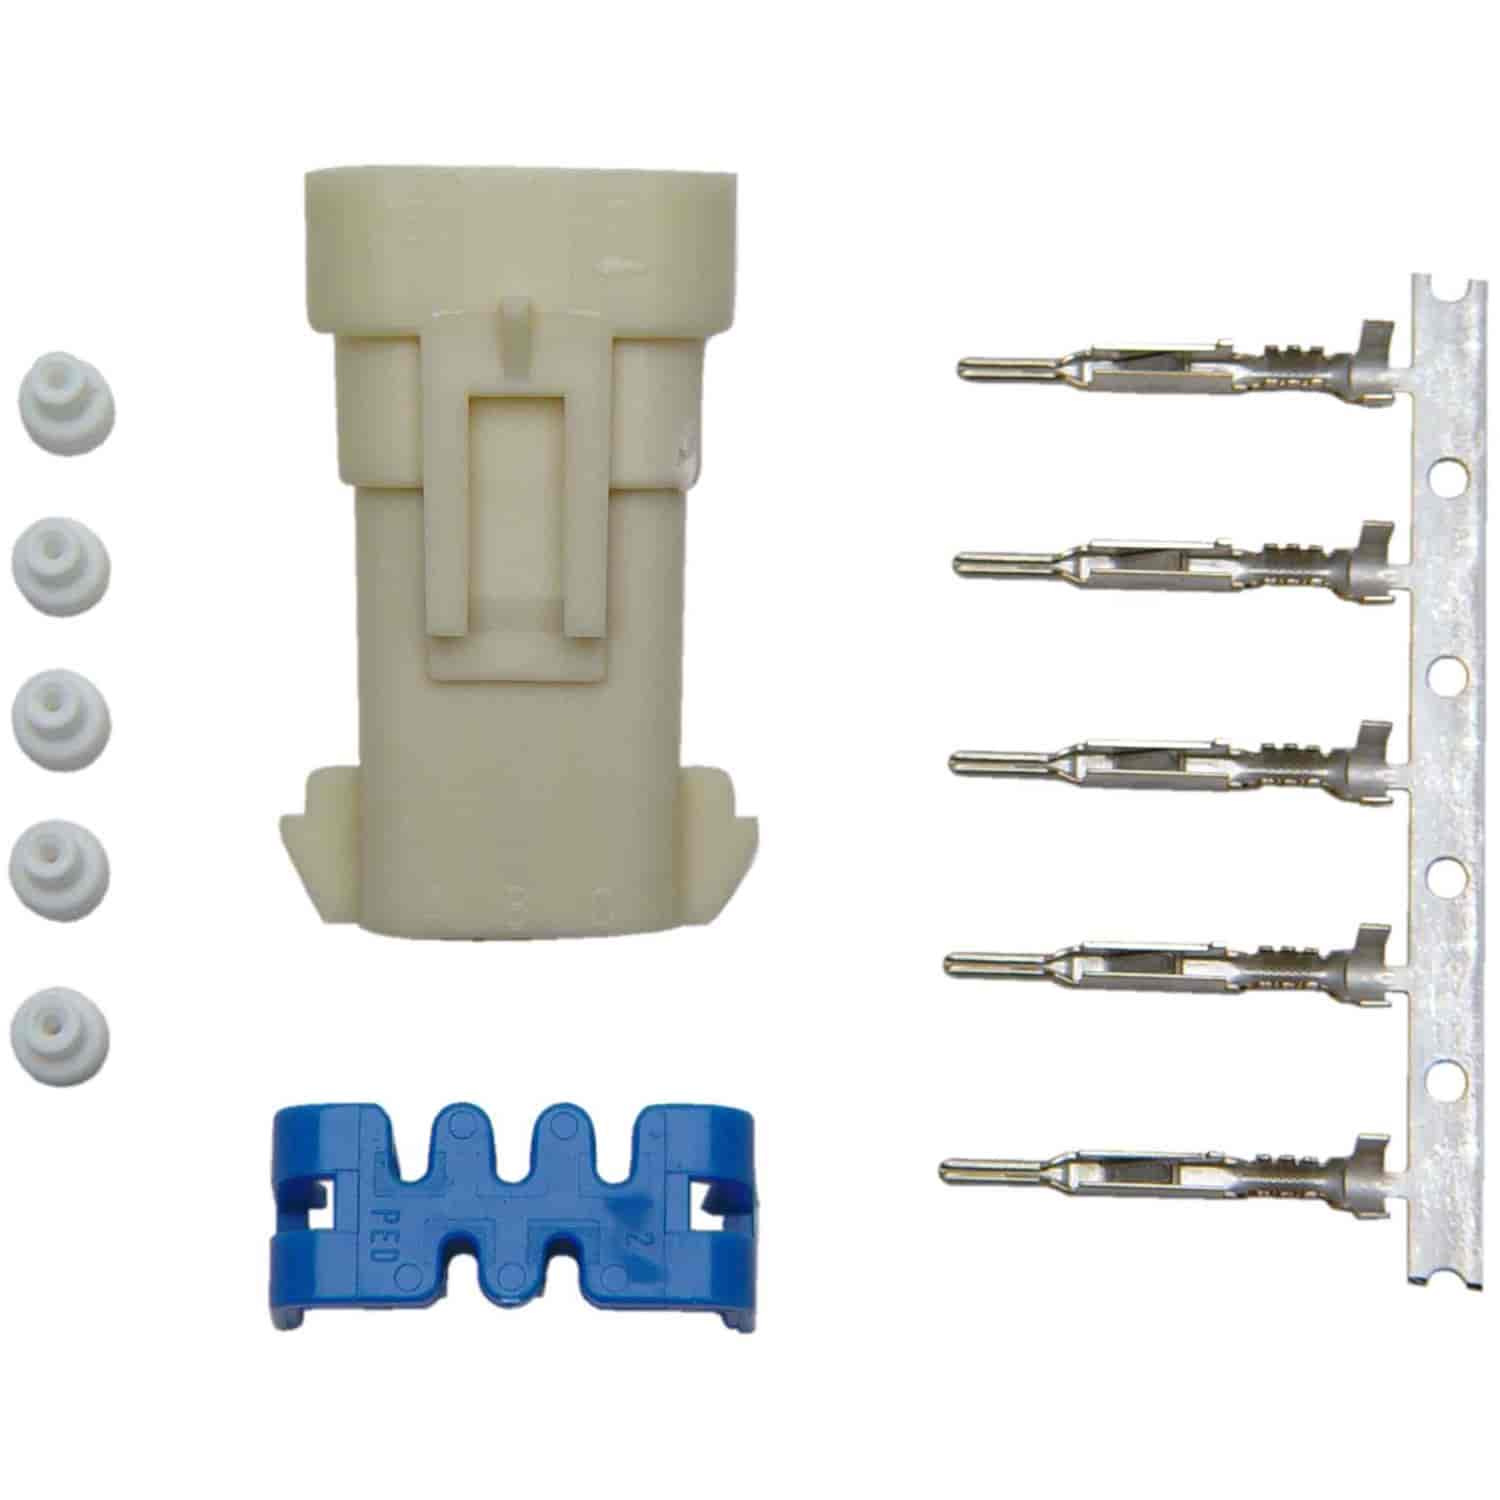 CONNECTOR KIT FAST FLASH